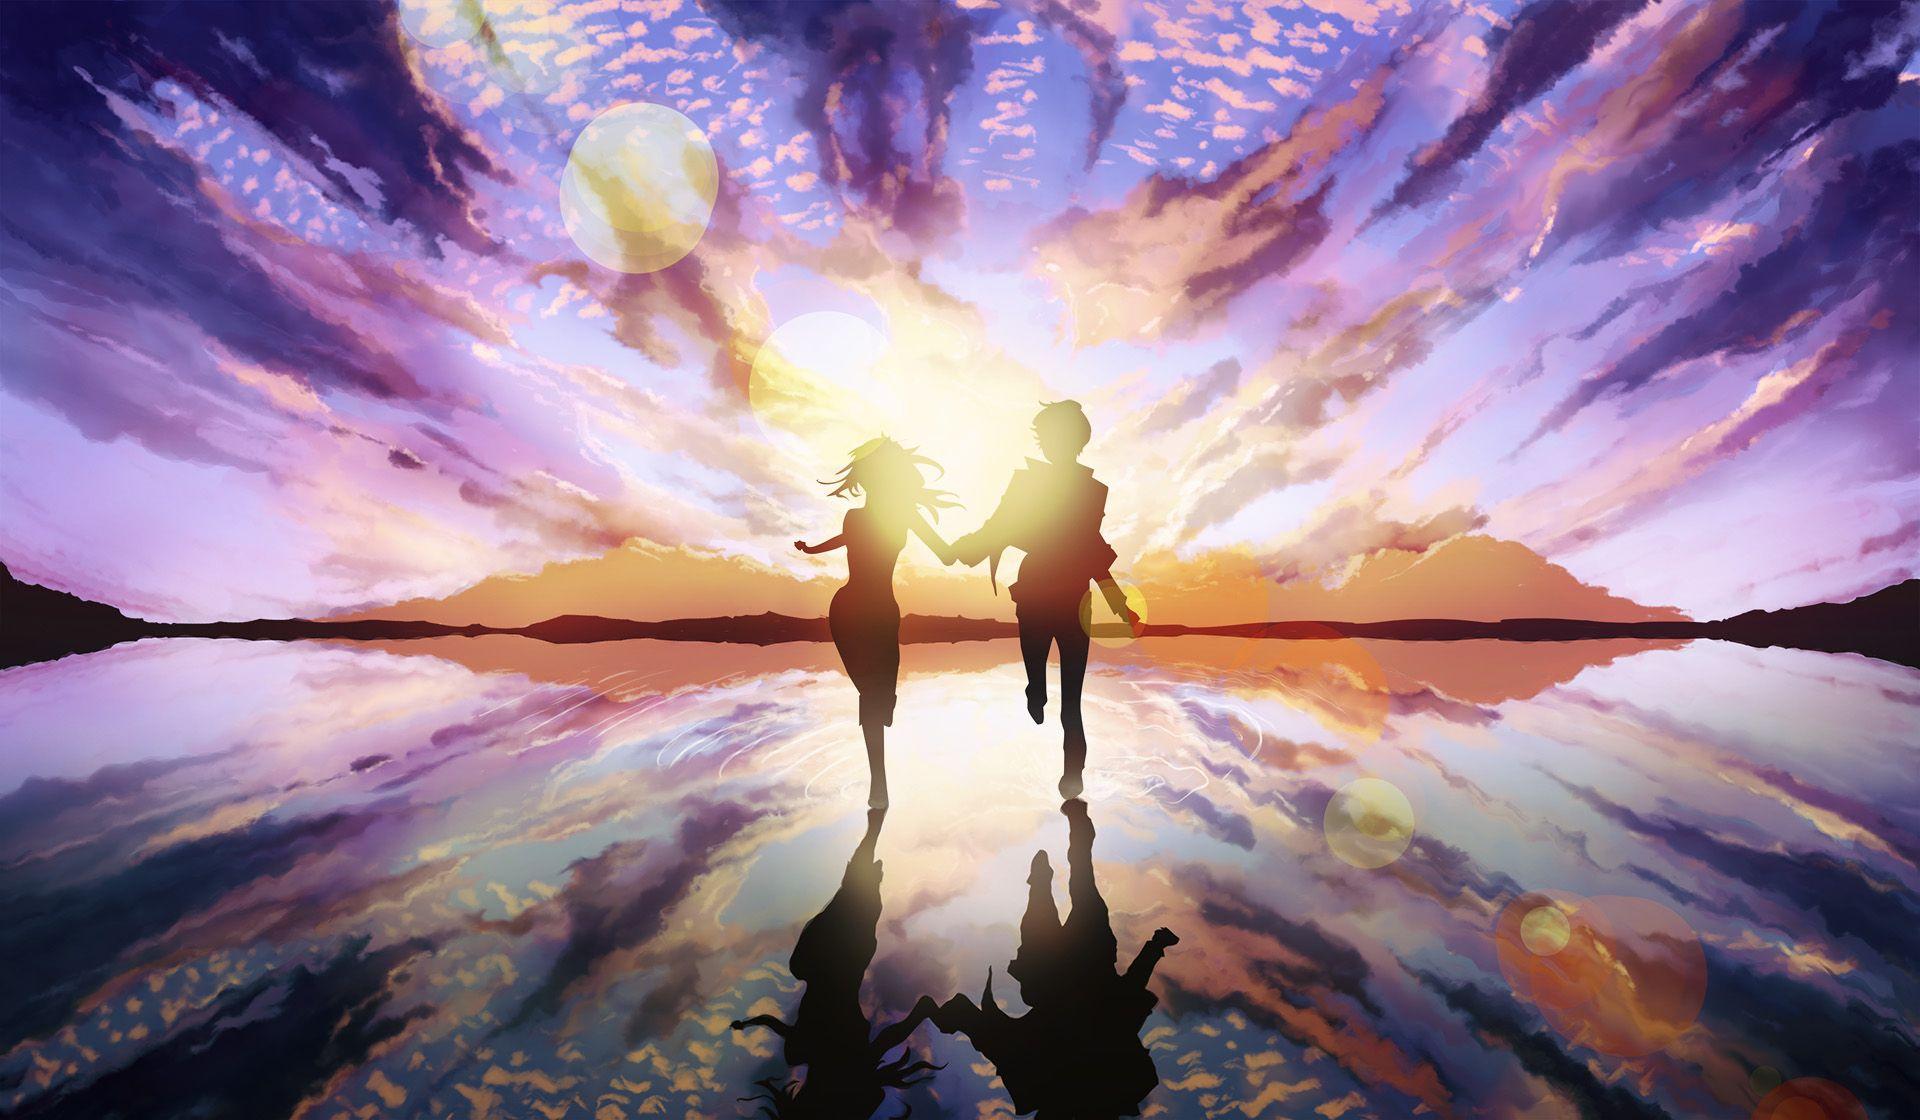 Holding Hands Romantic Anime Wallpapers Top Free Holding Hands Romantic Anime Backgrounds Wallpaperaccess